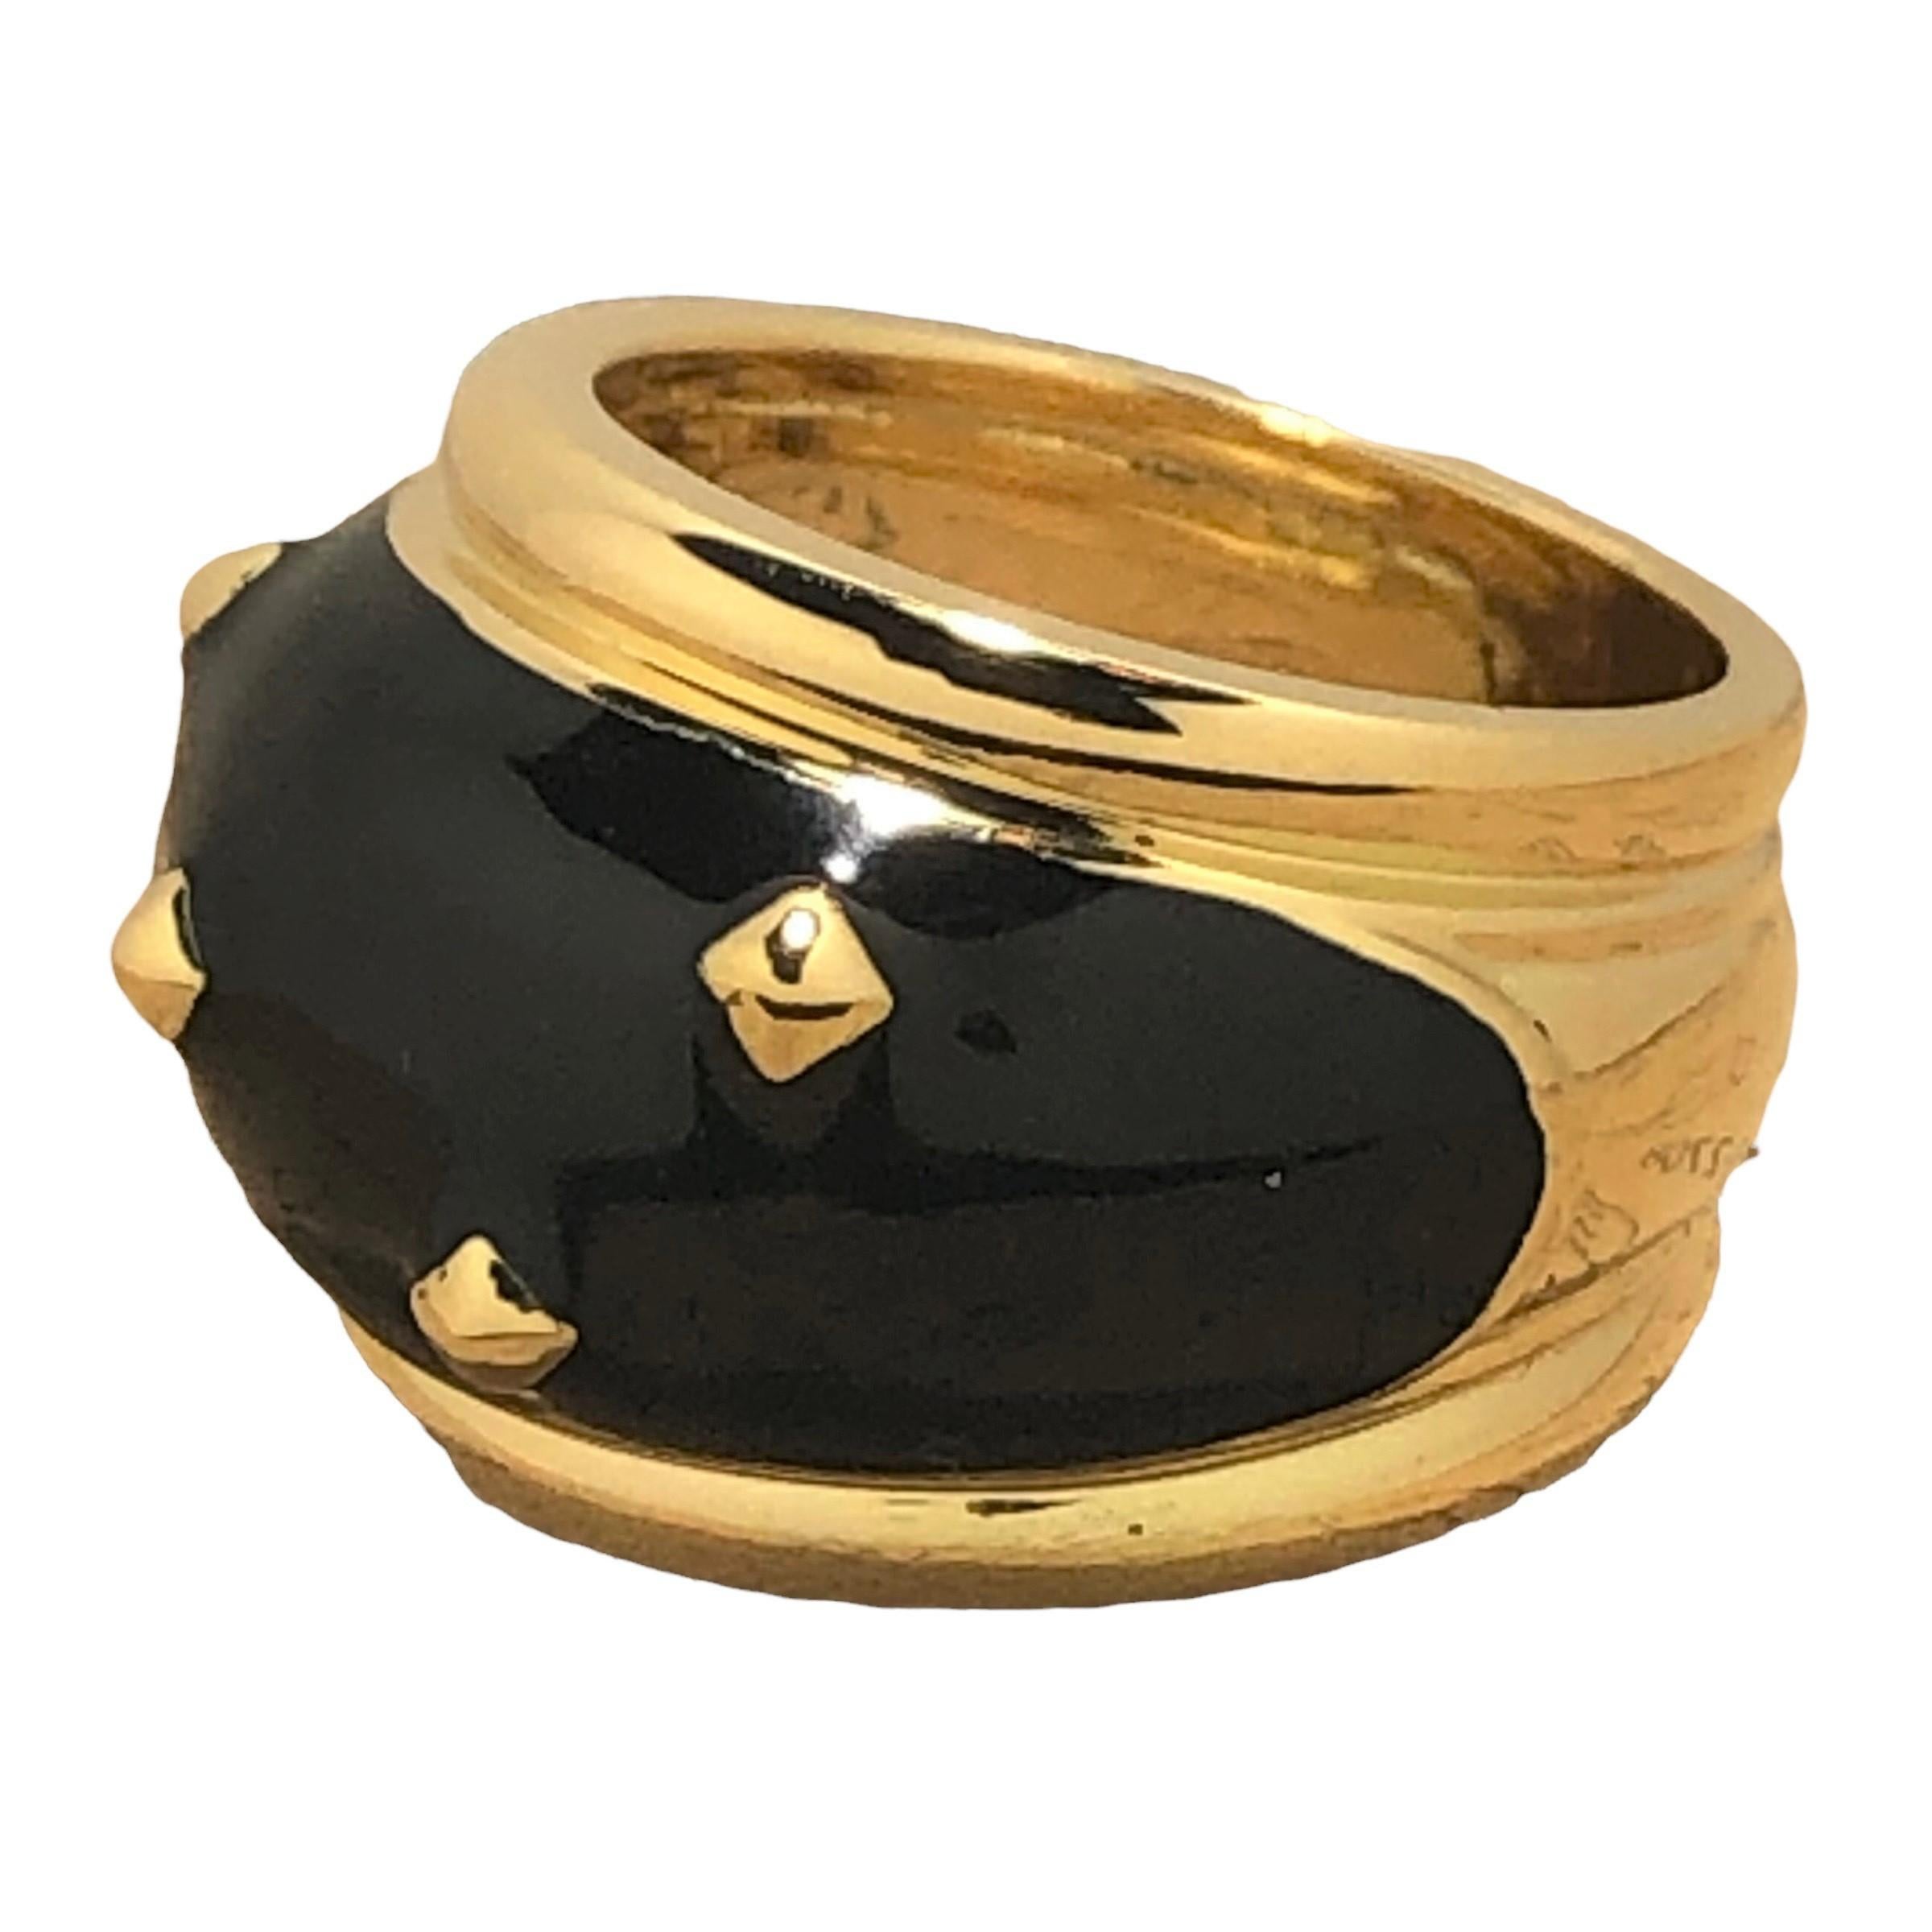 This interesting 18k yellow gold, late-20th century bombe dome ring features a field of glossy black enamel which is punctuated at regular intervals by pyramidal gold studs. The entire design area is flanked  with a half round gold border which